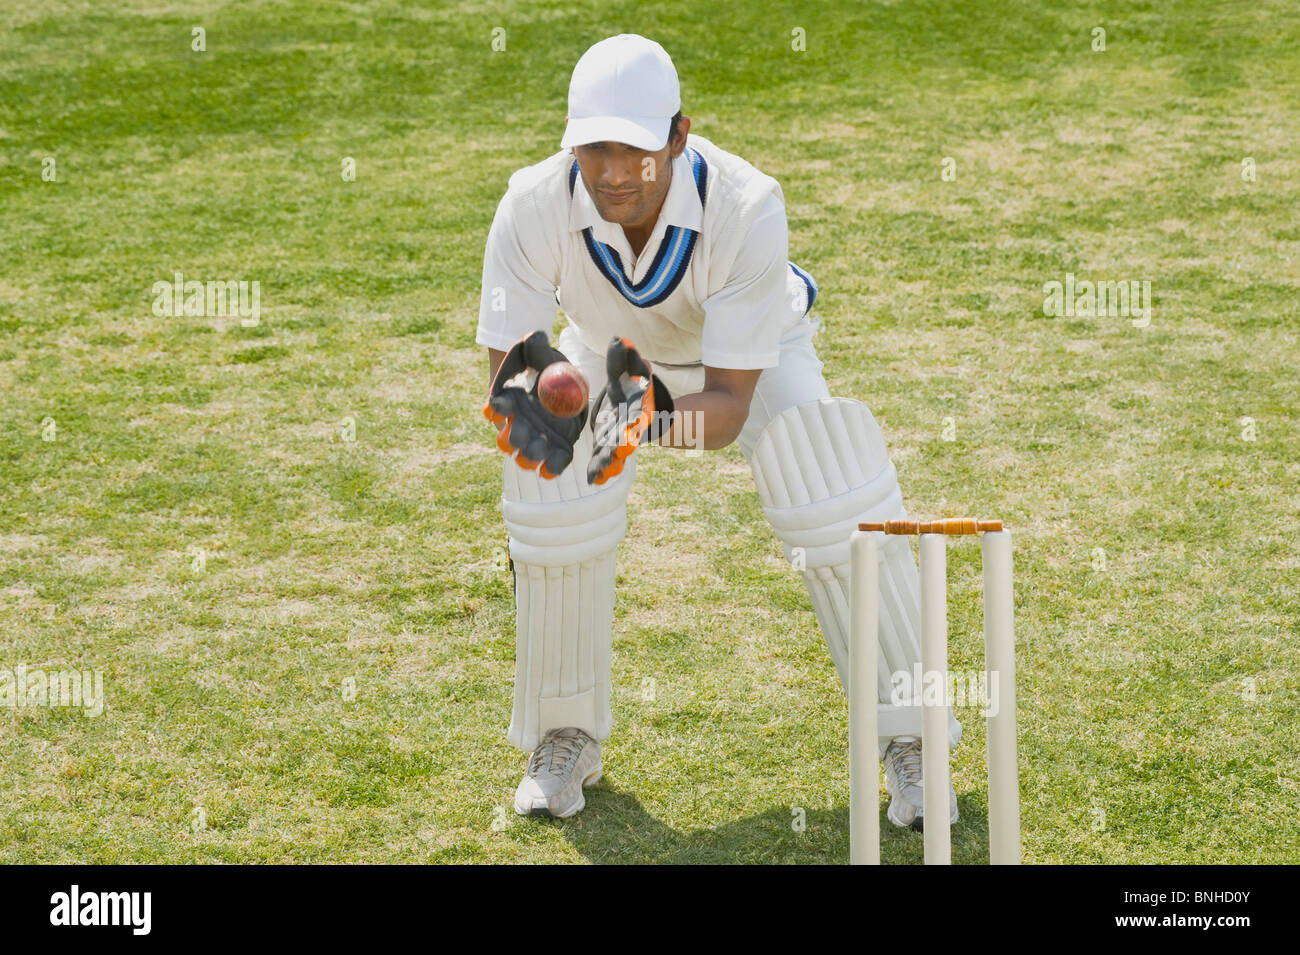 Cricket wicketkeeper catching a ball behind stumps Stock Photo